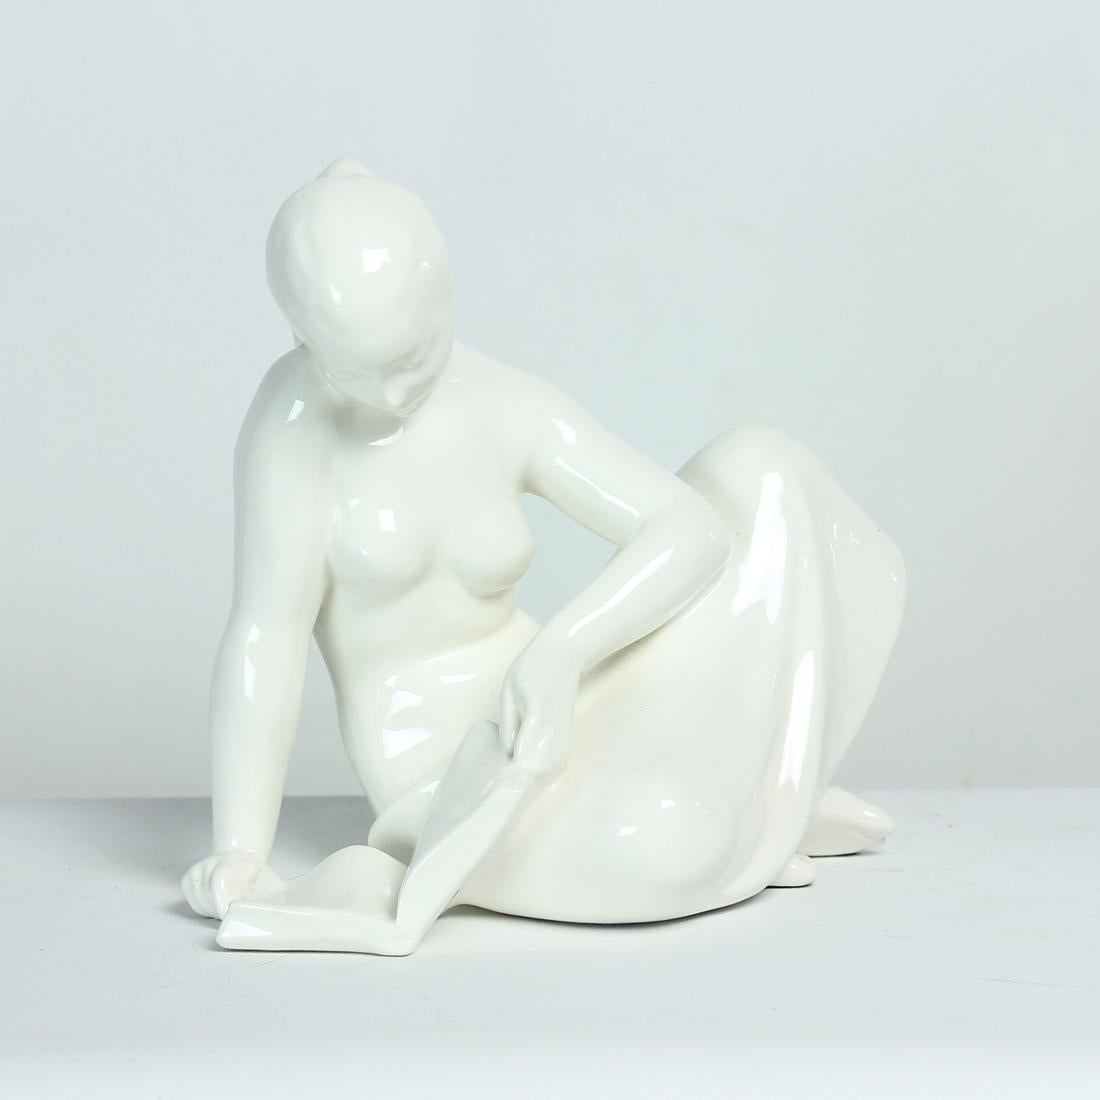 Beautiful vintage porcelaine statue produced by Jihokera company in 1960s. Original stamp partially visible on the bottom. The statue is in a white, glazed porcelaine. It shows a lady reading a book. The statue looks amazing. Excellent condition